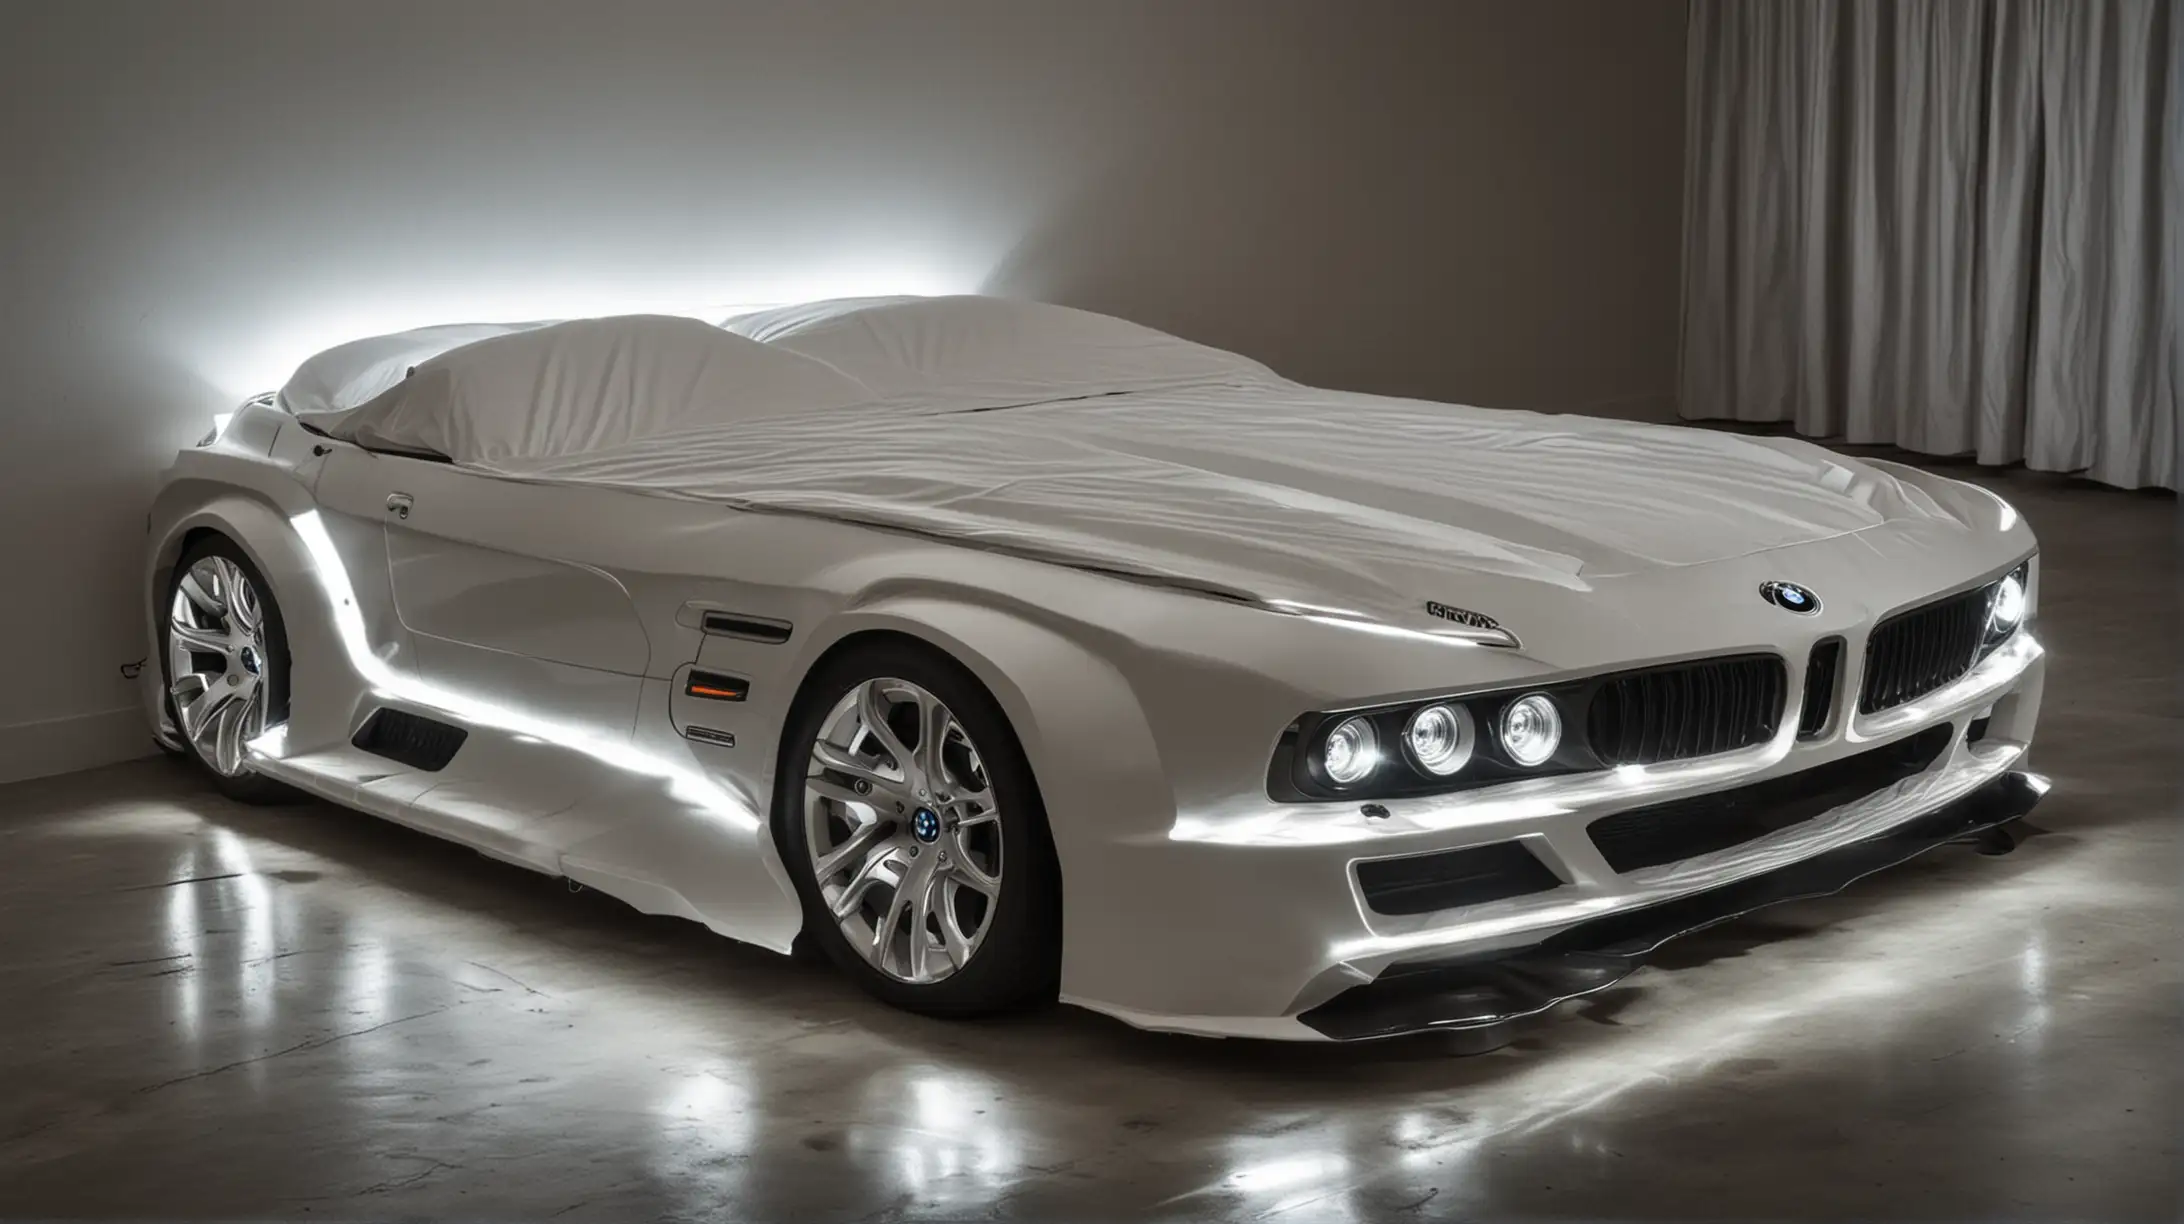 BMW Car Bed with Headlights On